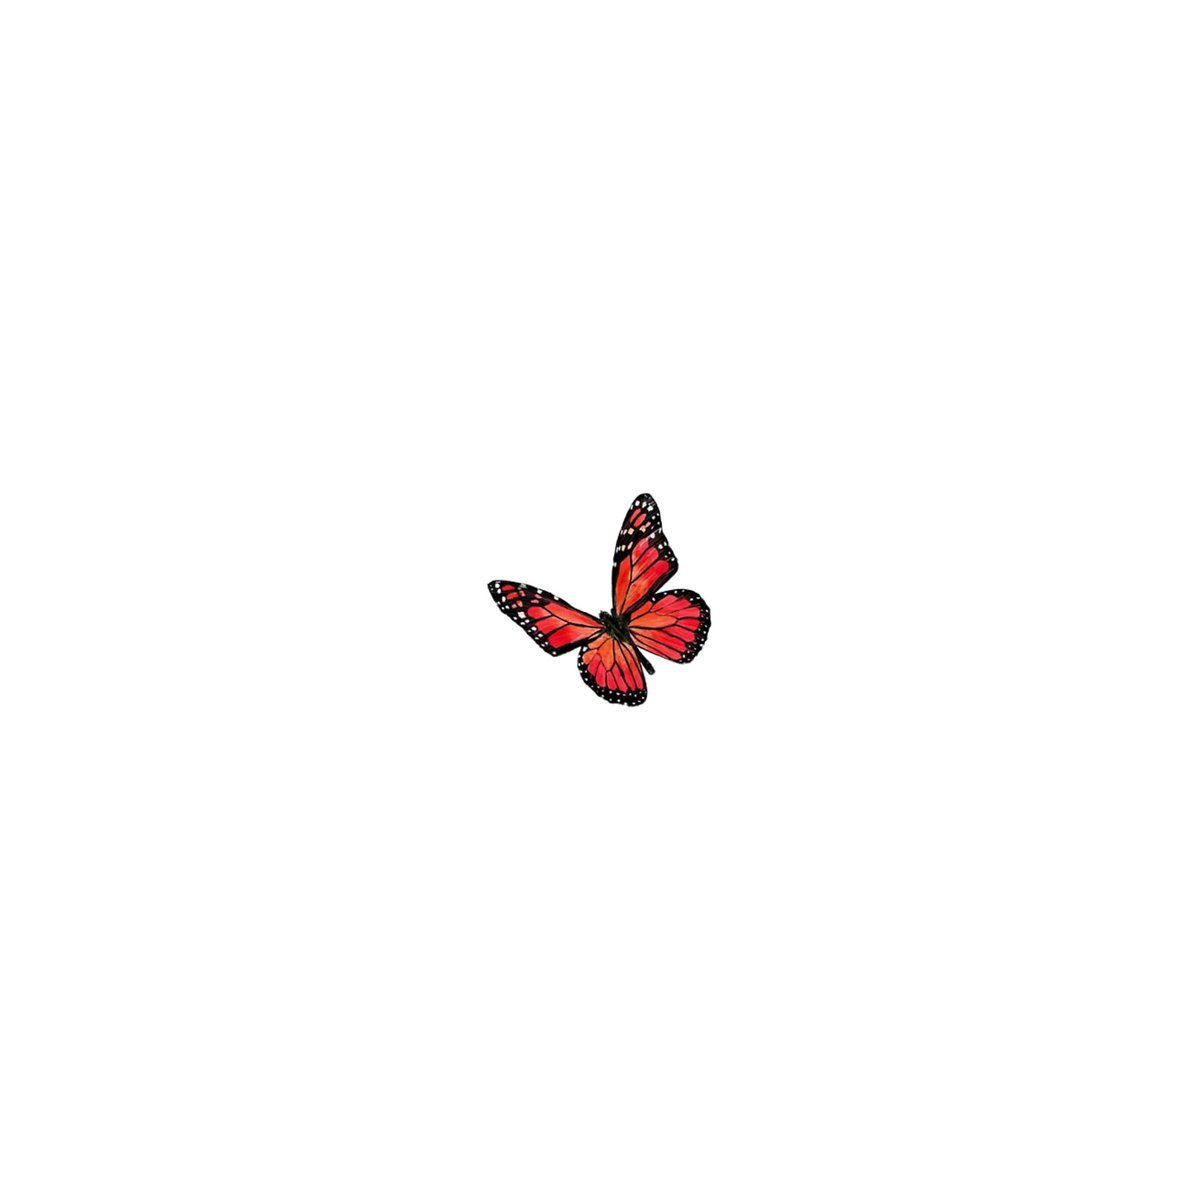 — [♡] ; red butterfly